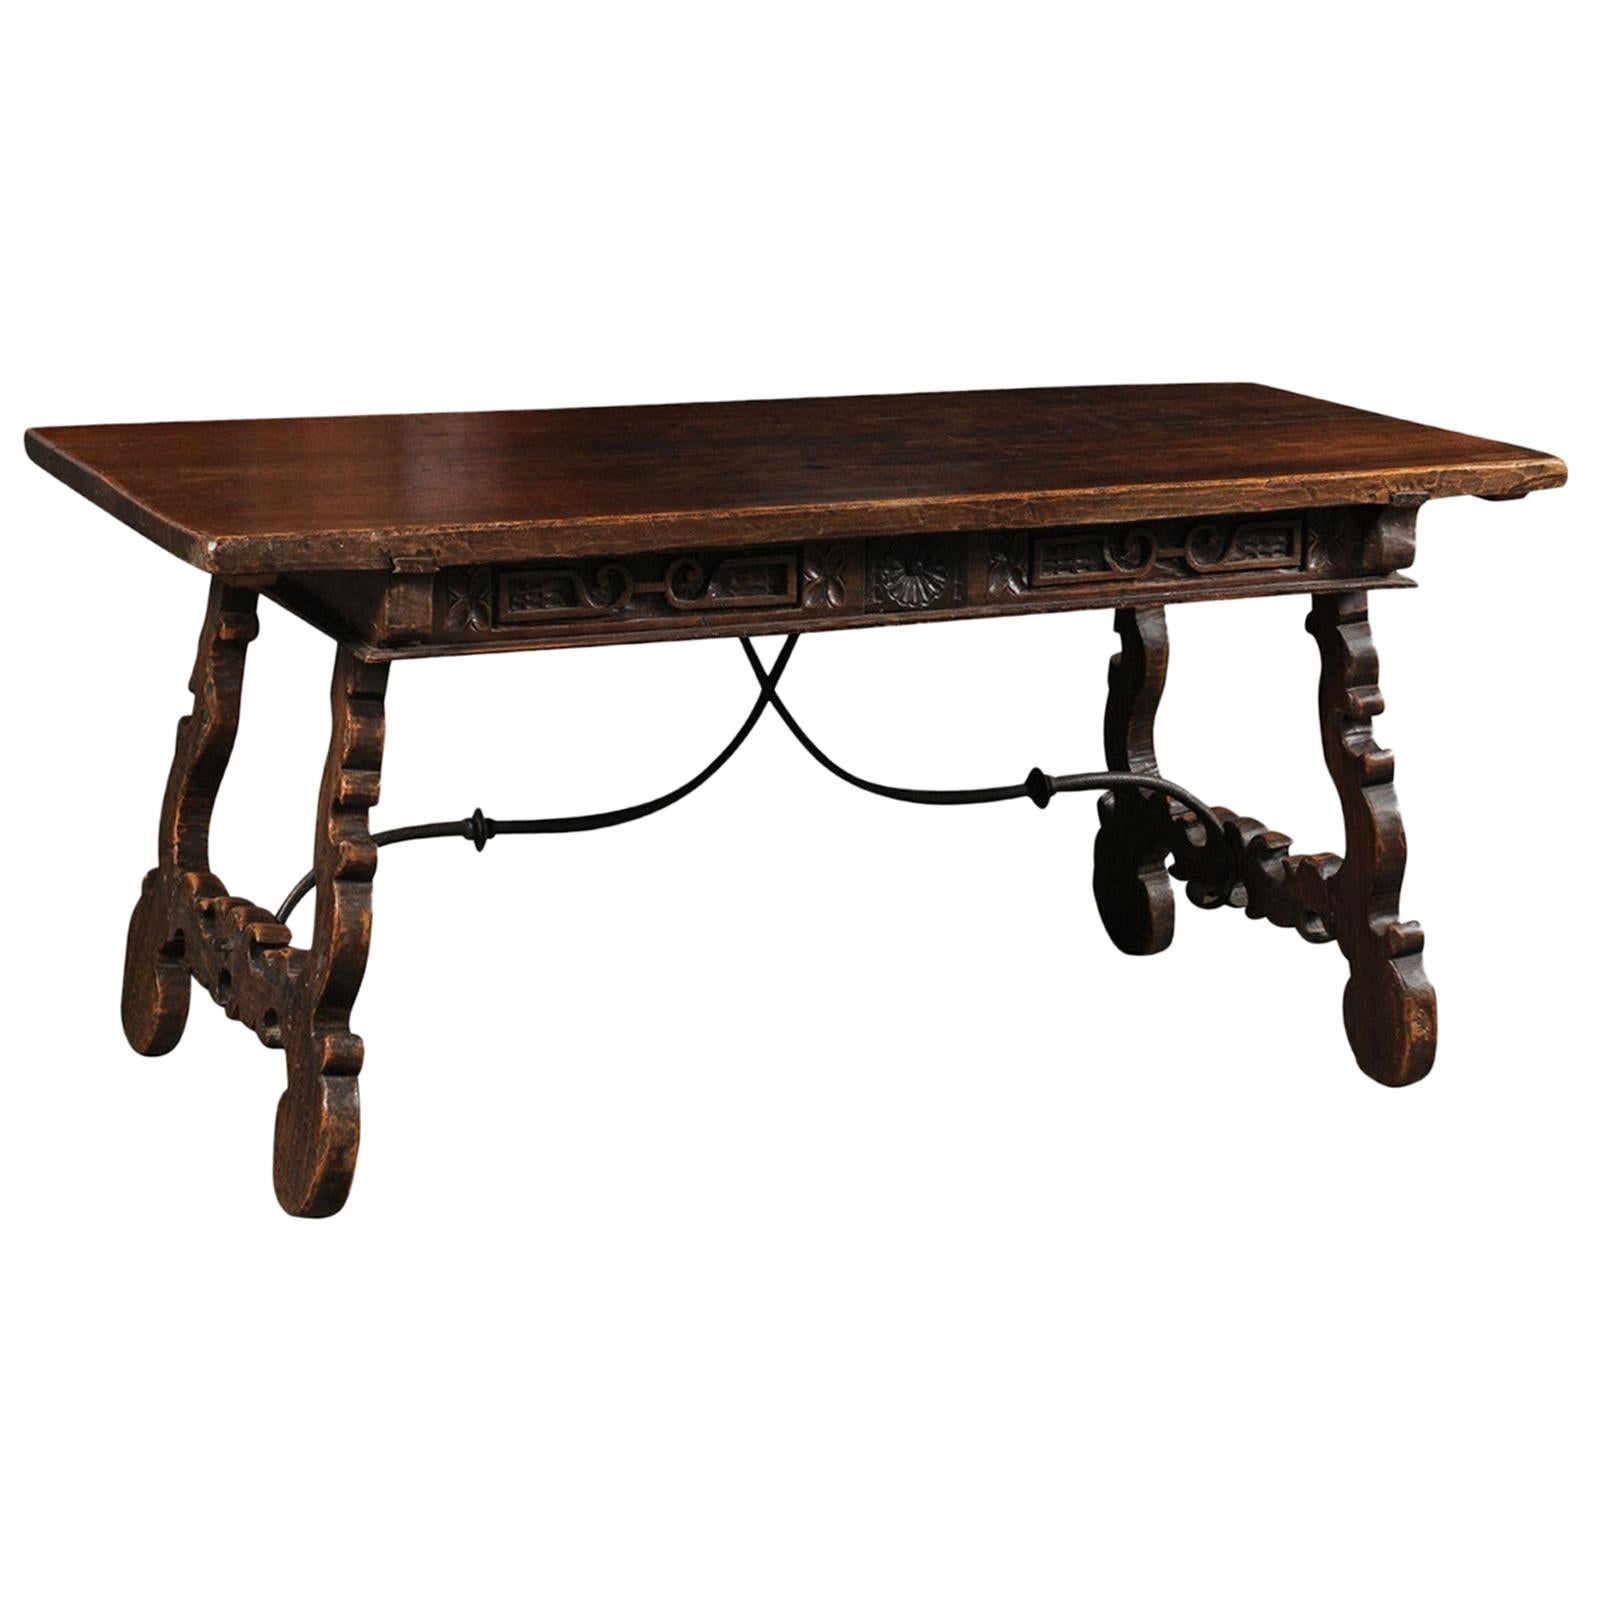 Spanish Baroque 1750s Walnut Fratino Table with Drawers and Iron Stretchers